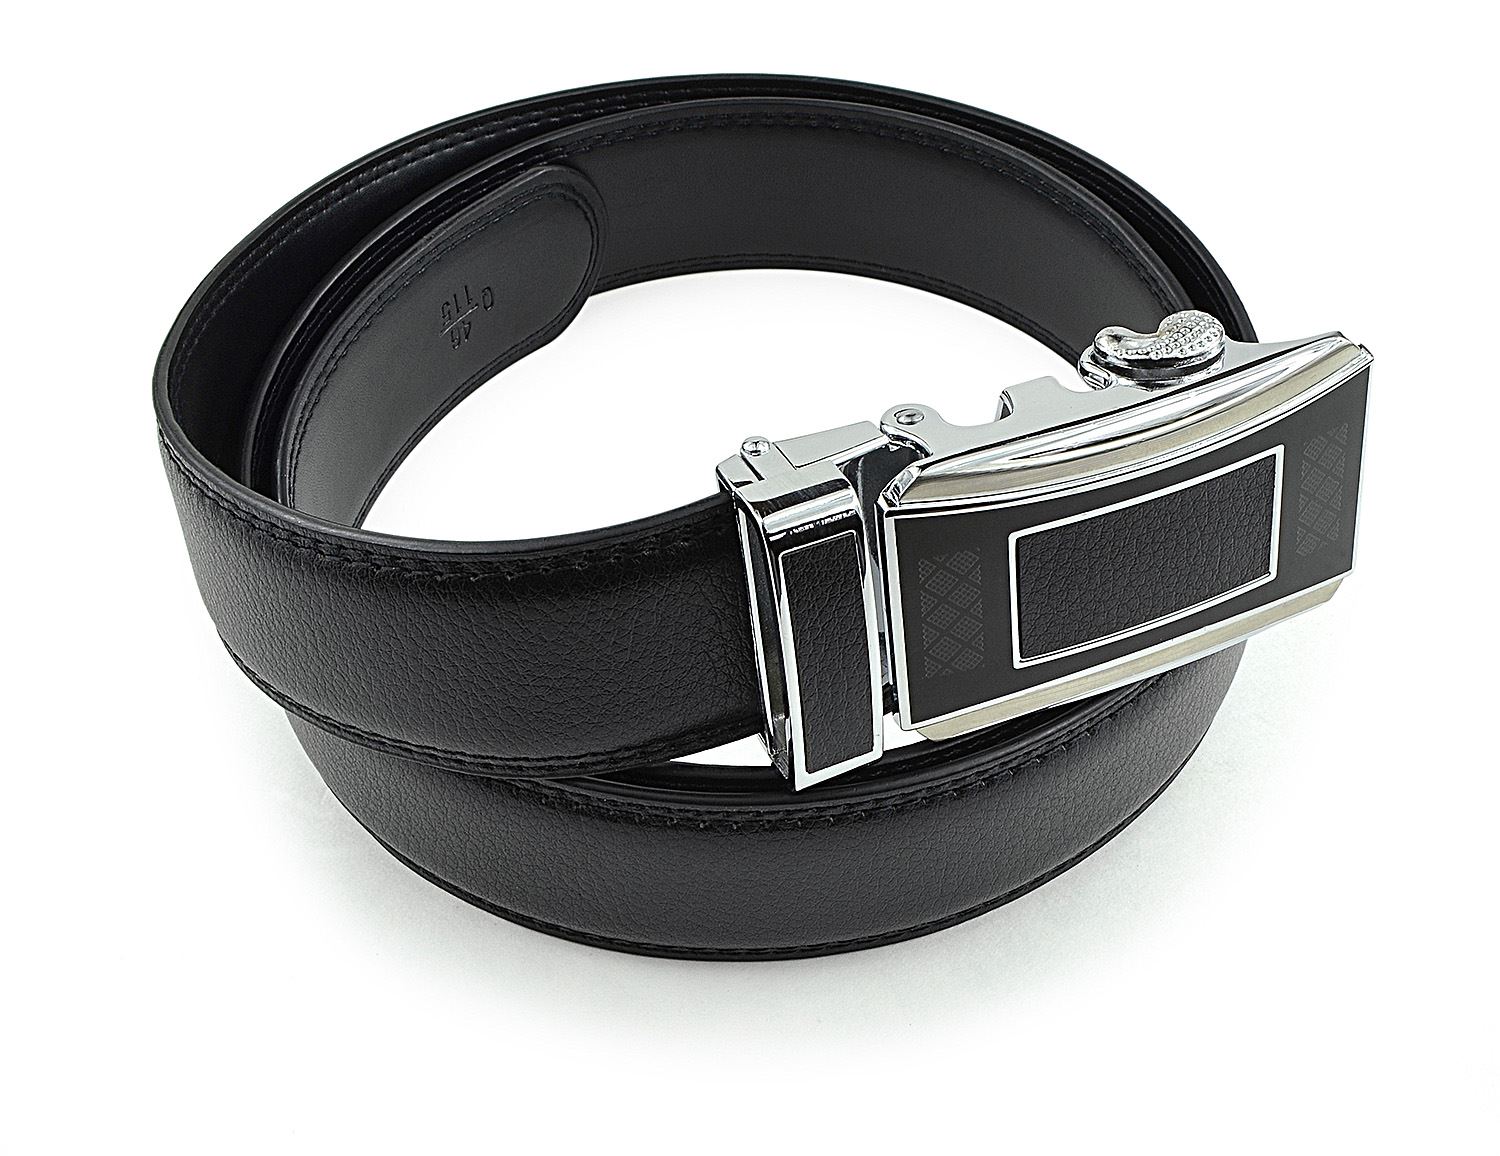 Mens Leather Belt with Automatic Slide Buckle - Black PU Leather Ratchet Belt by Moda Di Raza - Black One Size